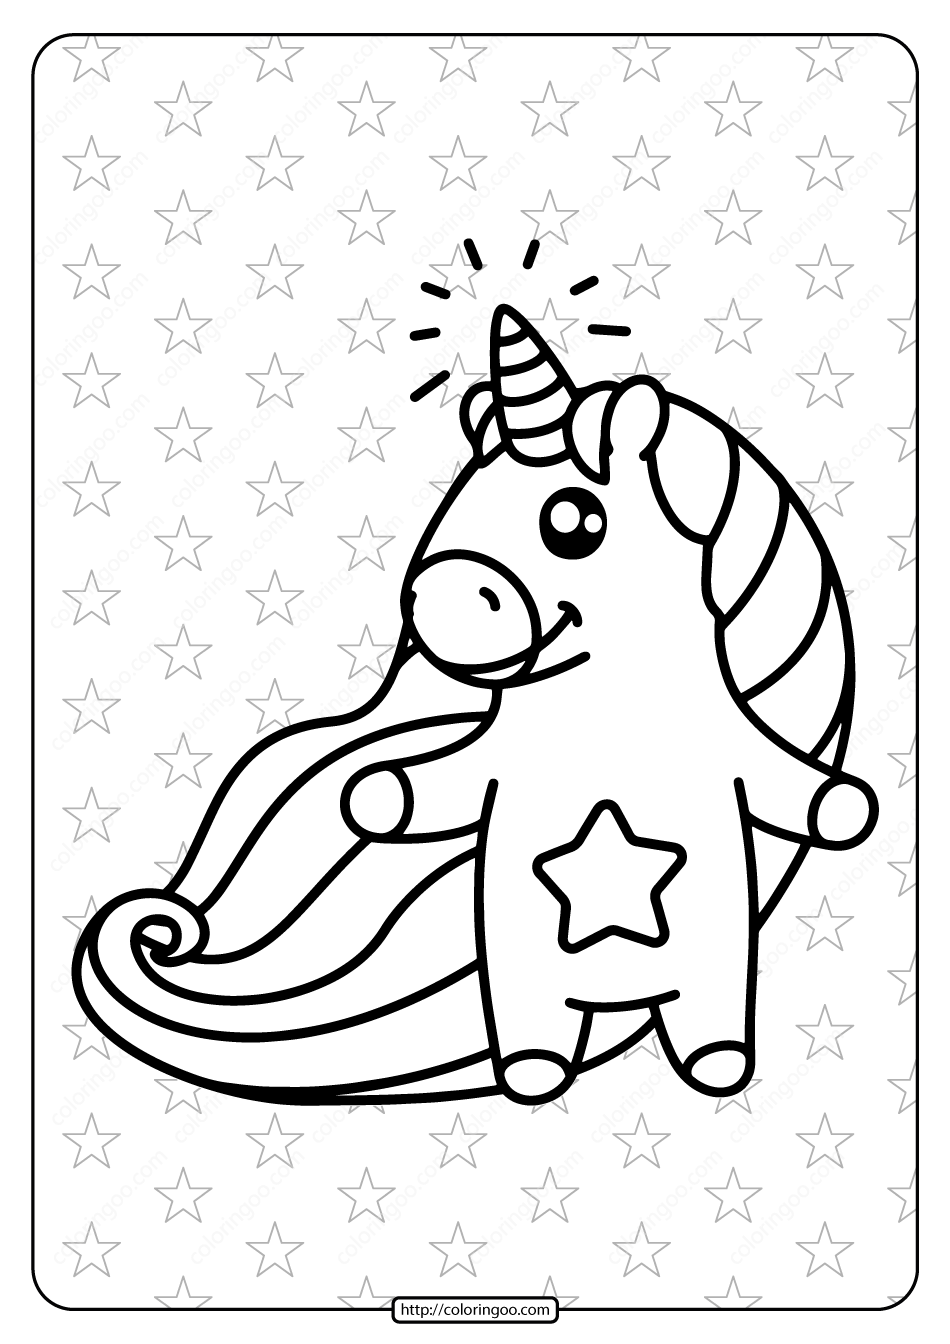 printable unicorn with star belly coloring page